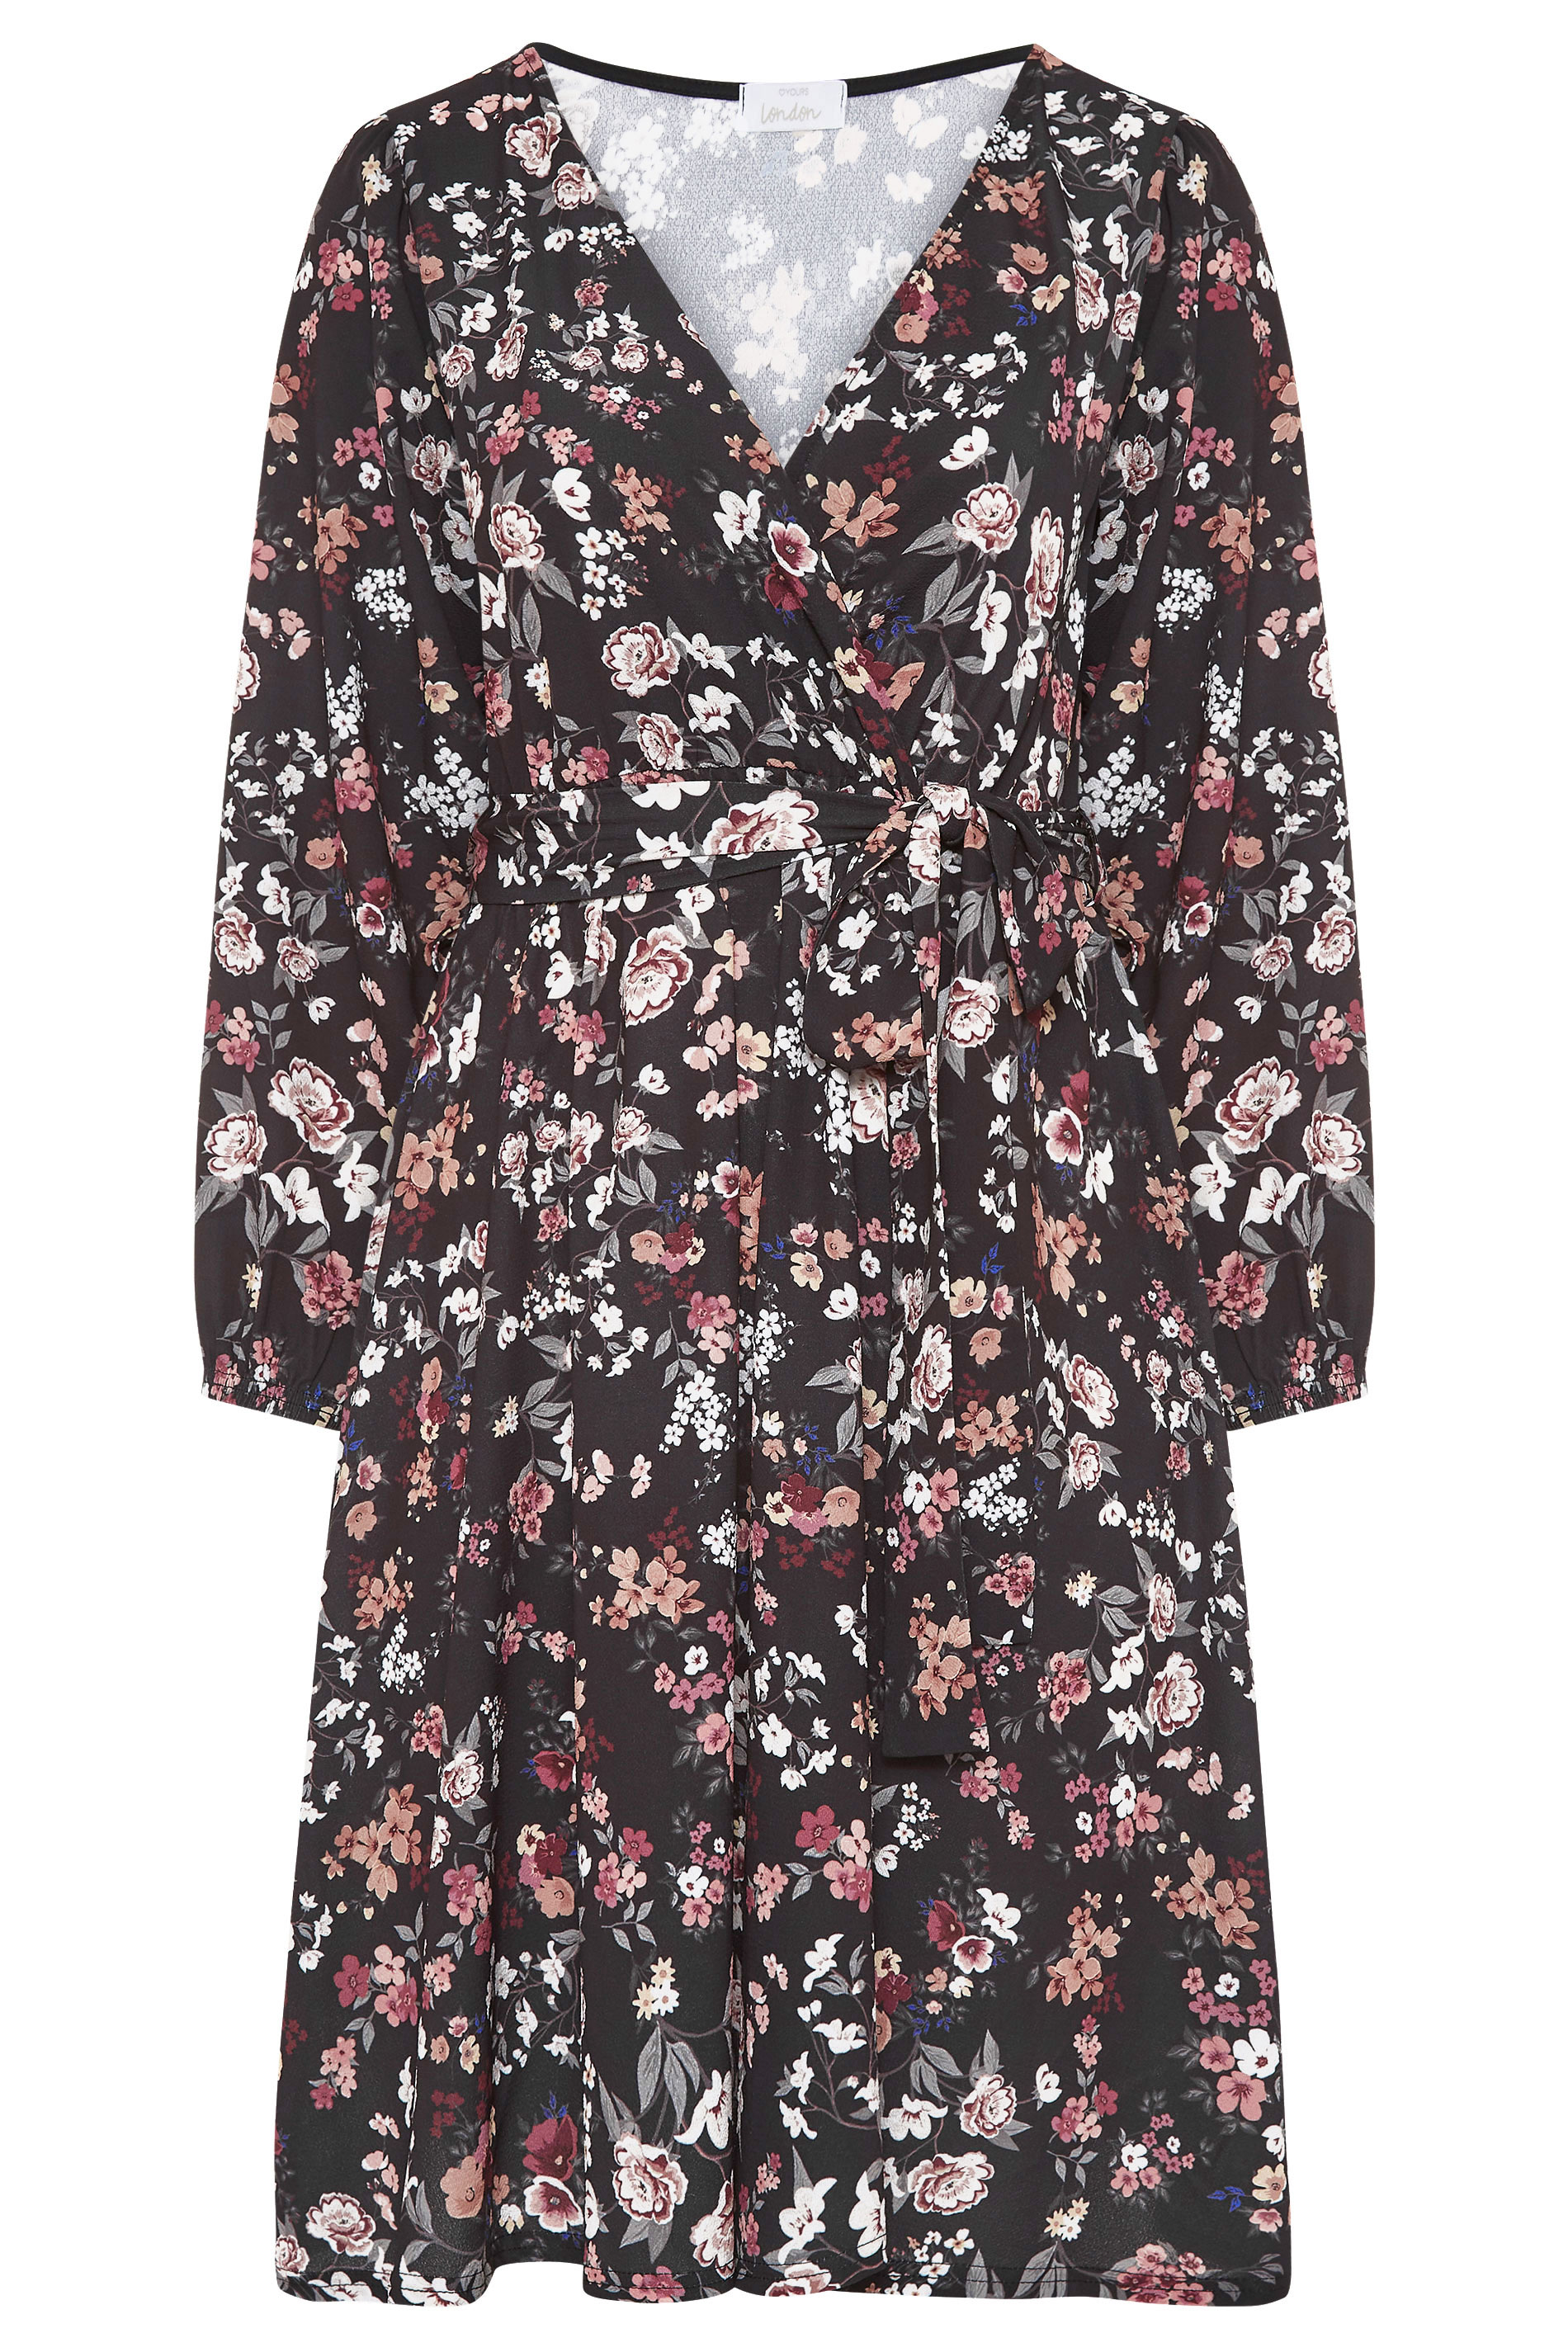 Robes Grande Taille Grande taille  Robes Portefeuilles | YOURS LONDON - Robe Noire Floral Midi Cache-Coeur - MF63204